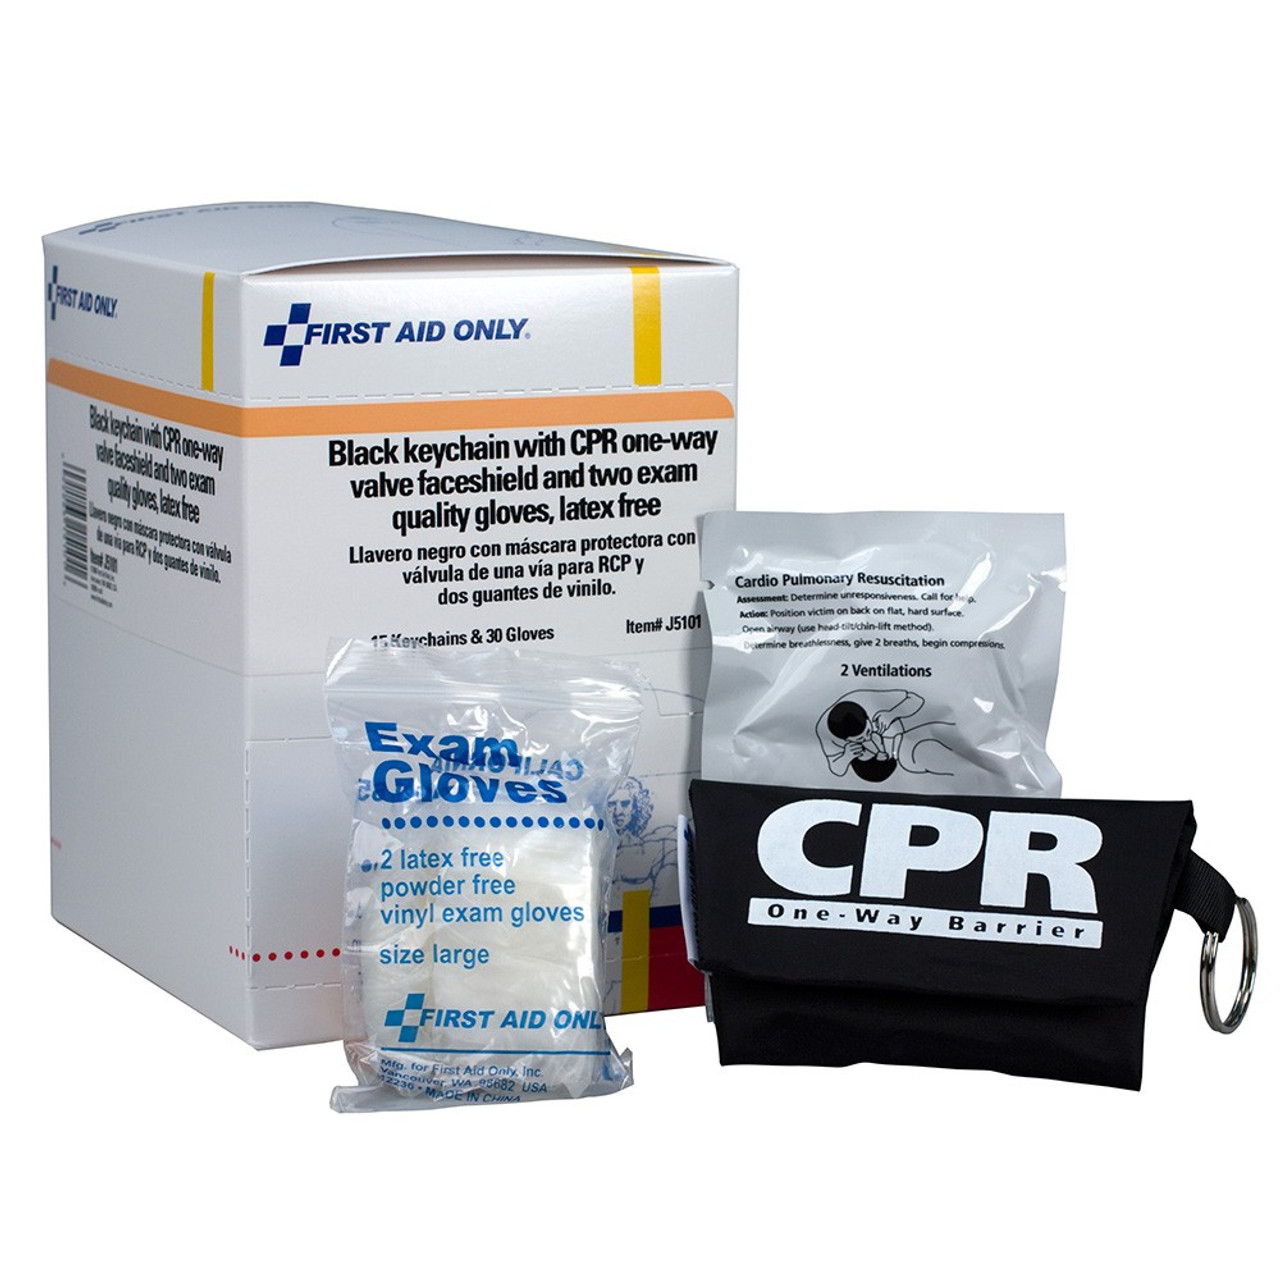 CPR Mask and Gloves Keychain